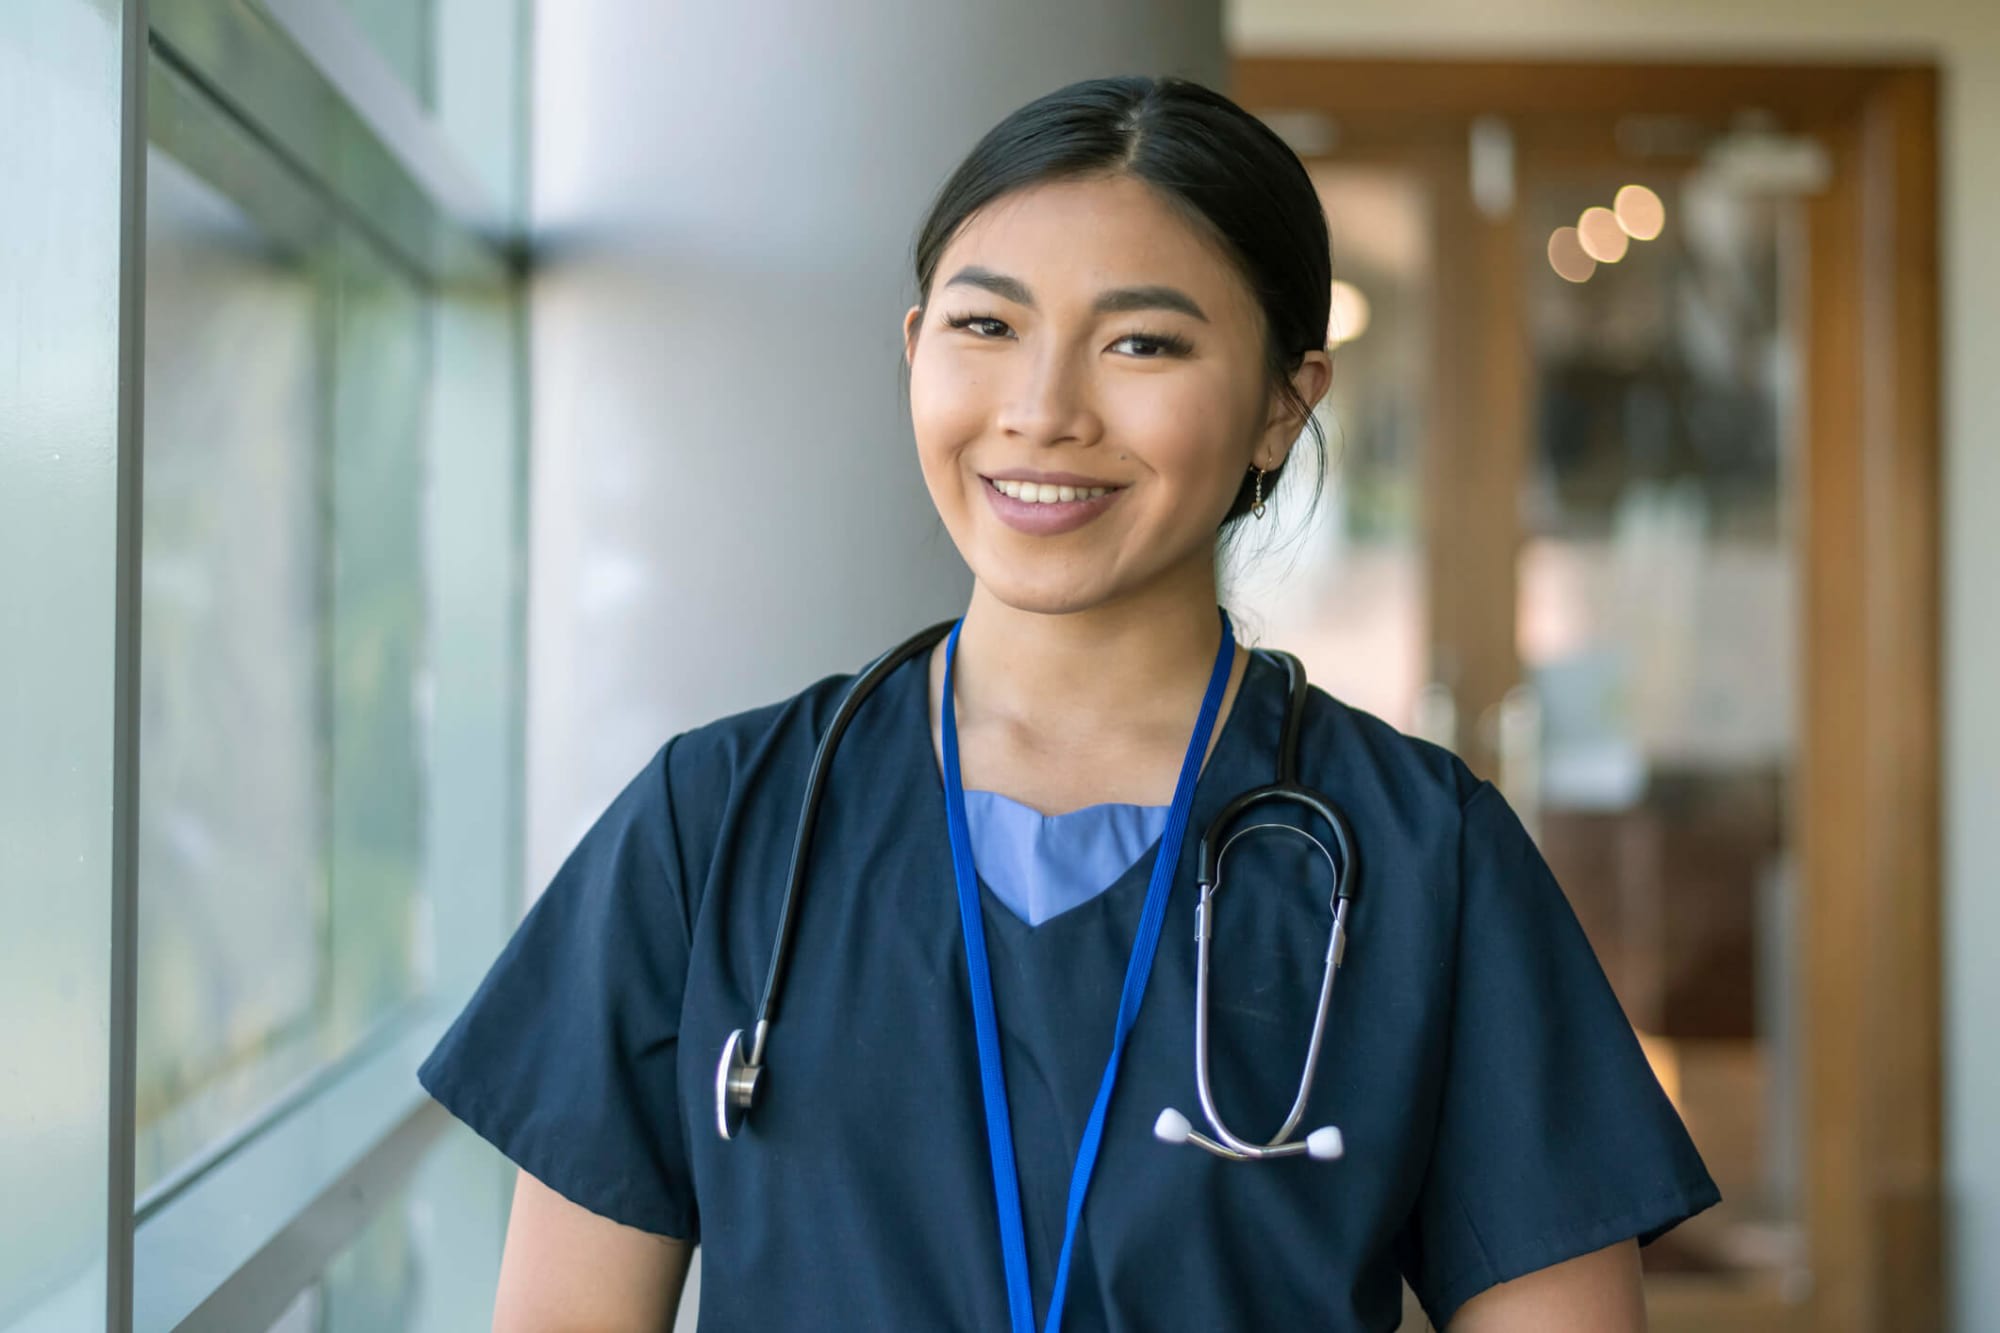 Best-Paying BSN Nursing Jobs and Careers